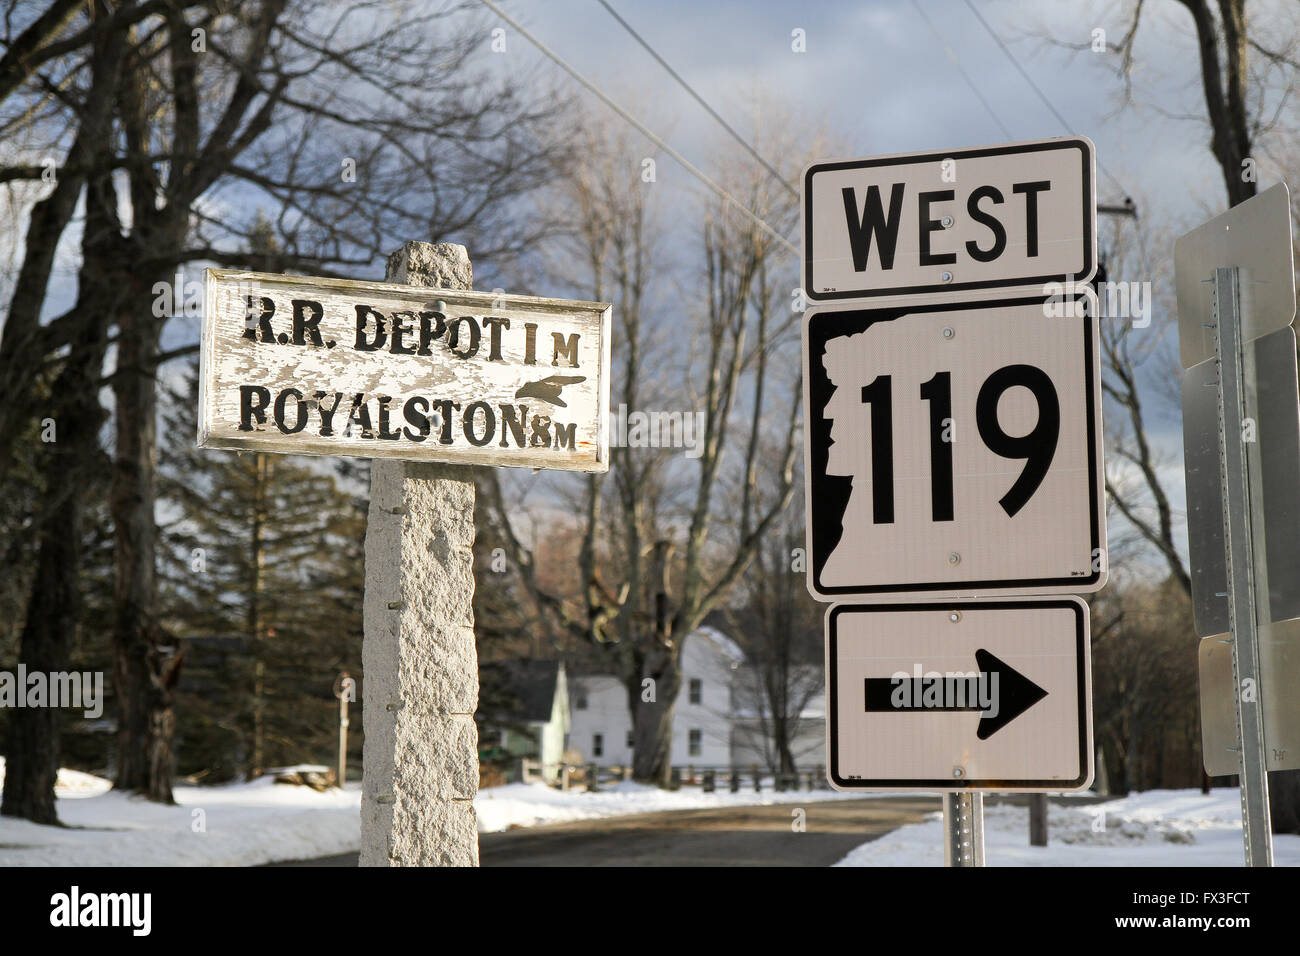 Road signs in the small town of Fitzwilliam, New Hampshire Stock Photo